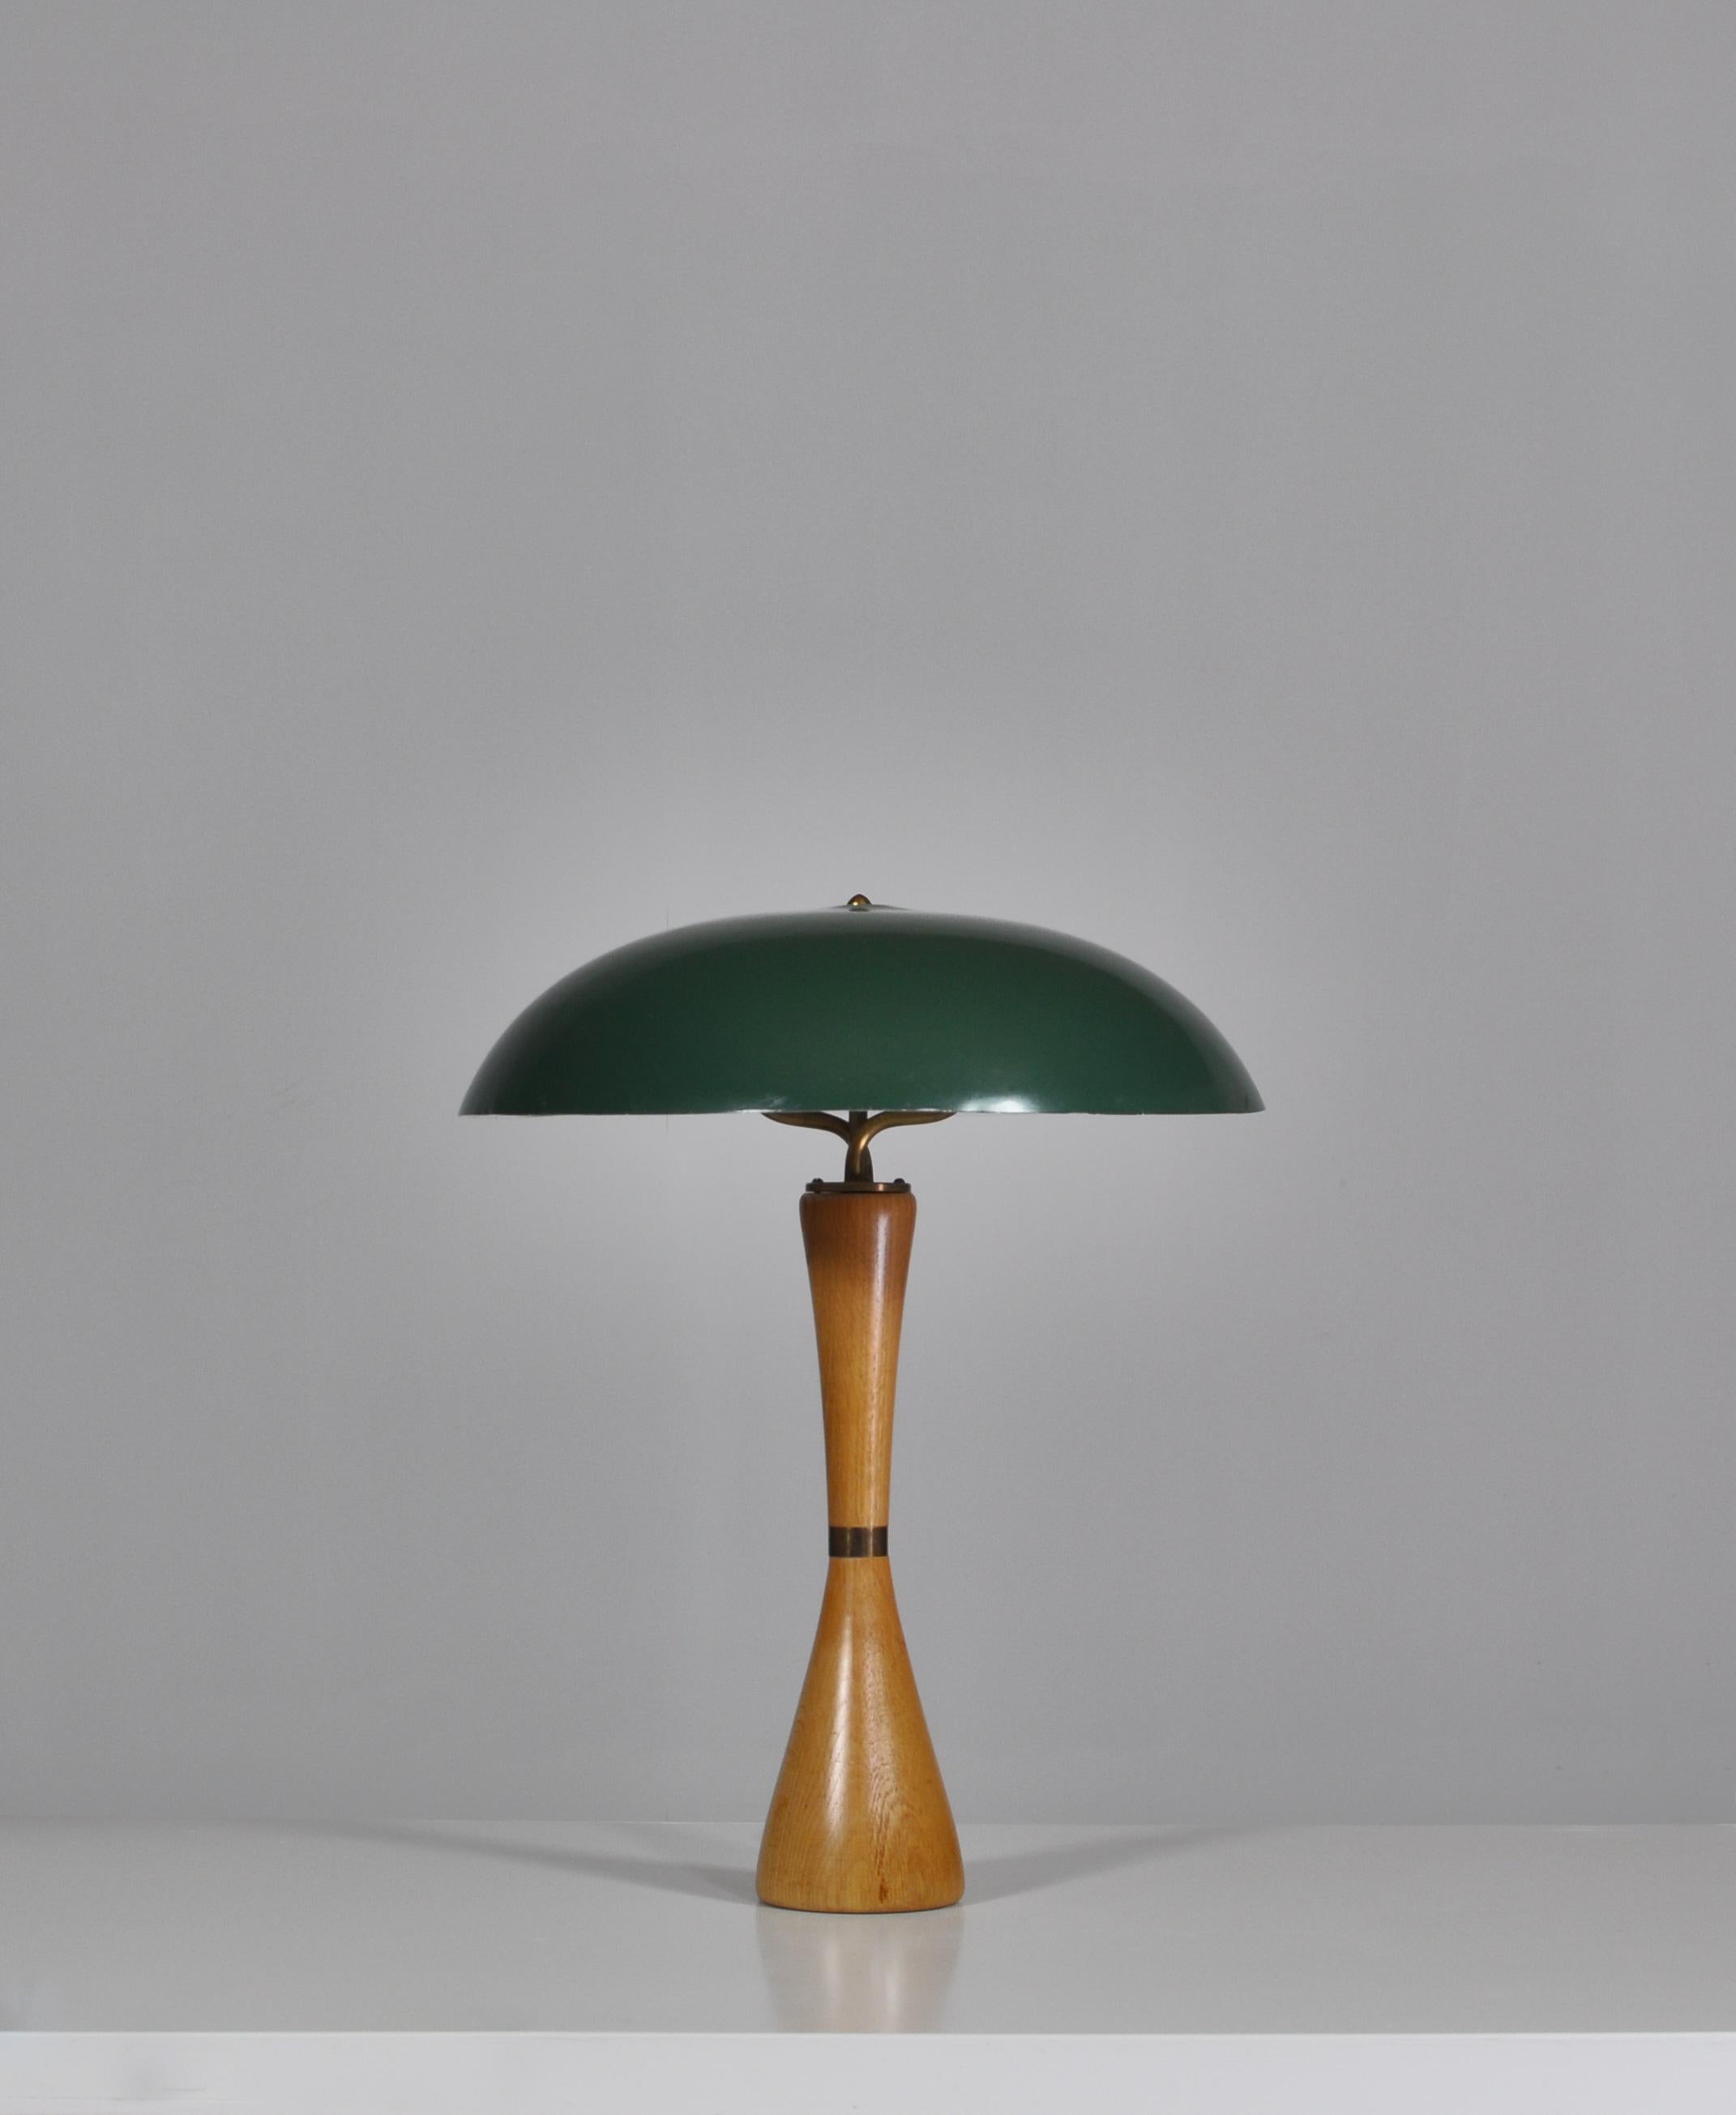 Wonderful vintage table lamp made in Sweden in the 1950s. The lamp is attributed to Hans Bergström as it bears strong resemblance to his work for ASEA. The design is typical for the Scandinavian modernism of the 1950s and features a beautifully